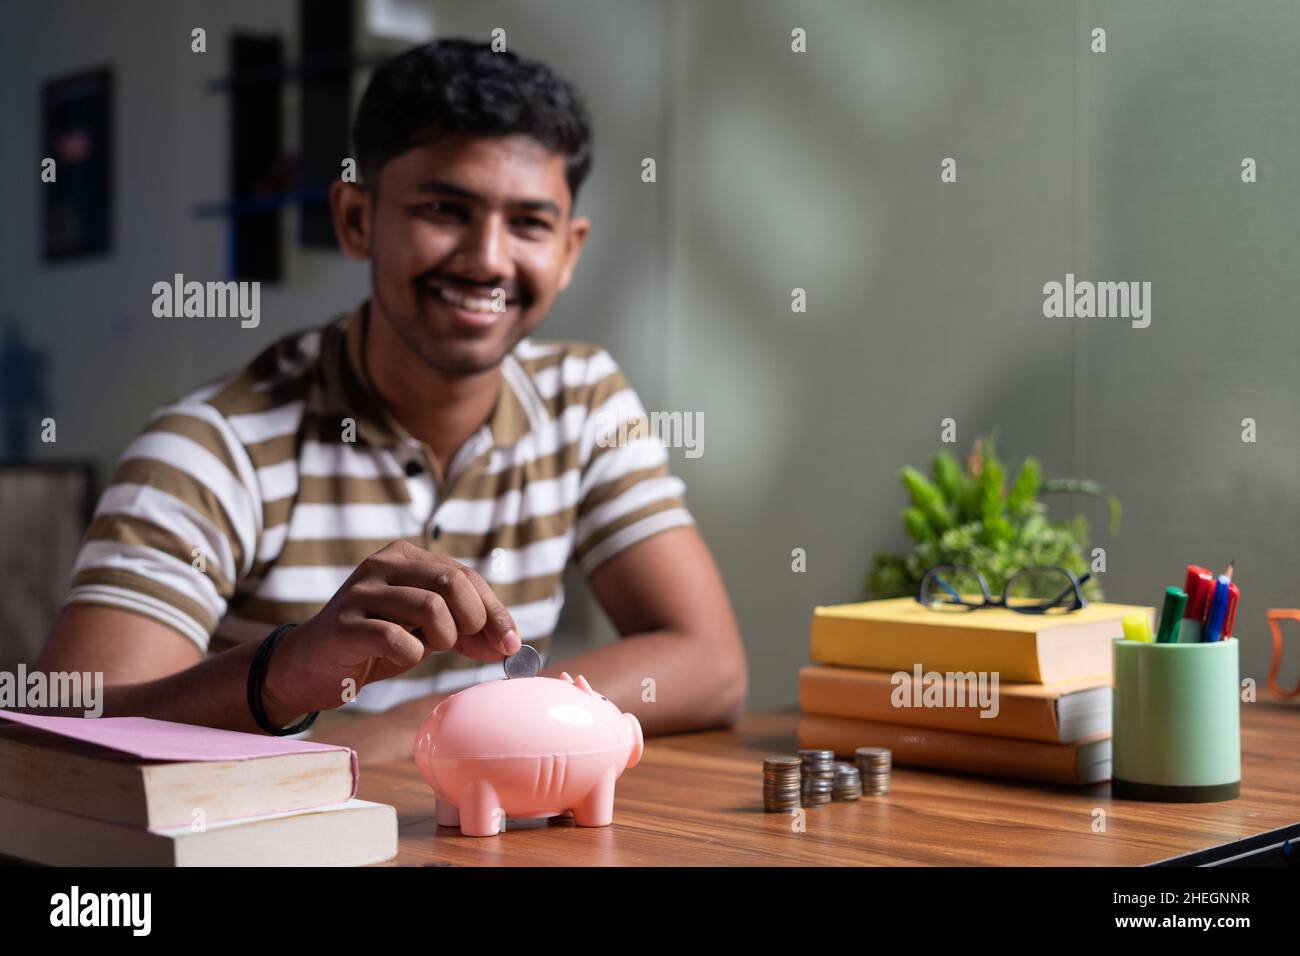 Focus on piggy money bank young indian student saving money for future abroad education by placing money on piggy bank while reading at home - concept Stock Photo